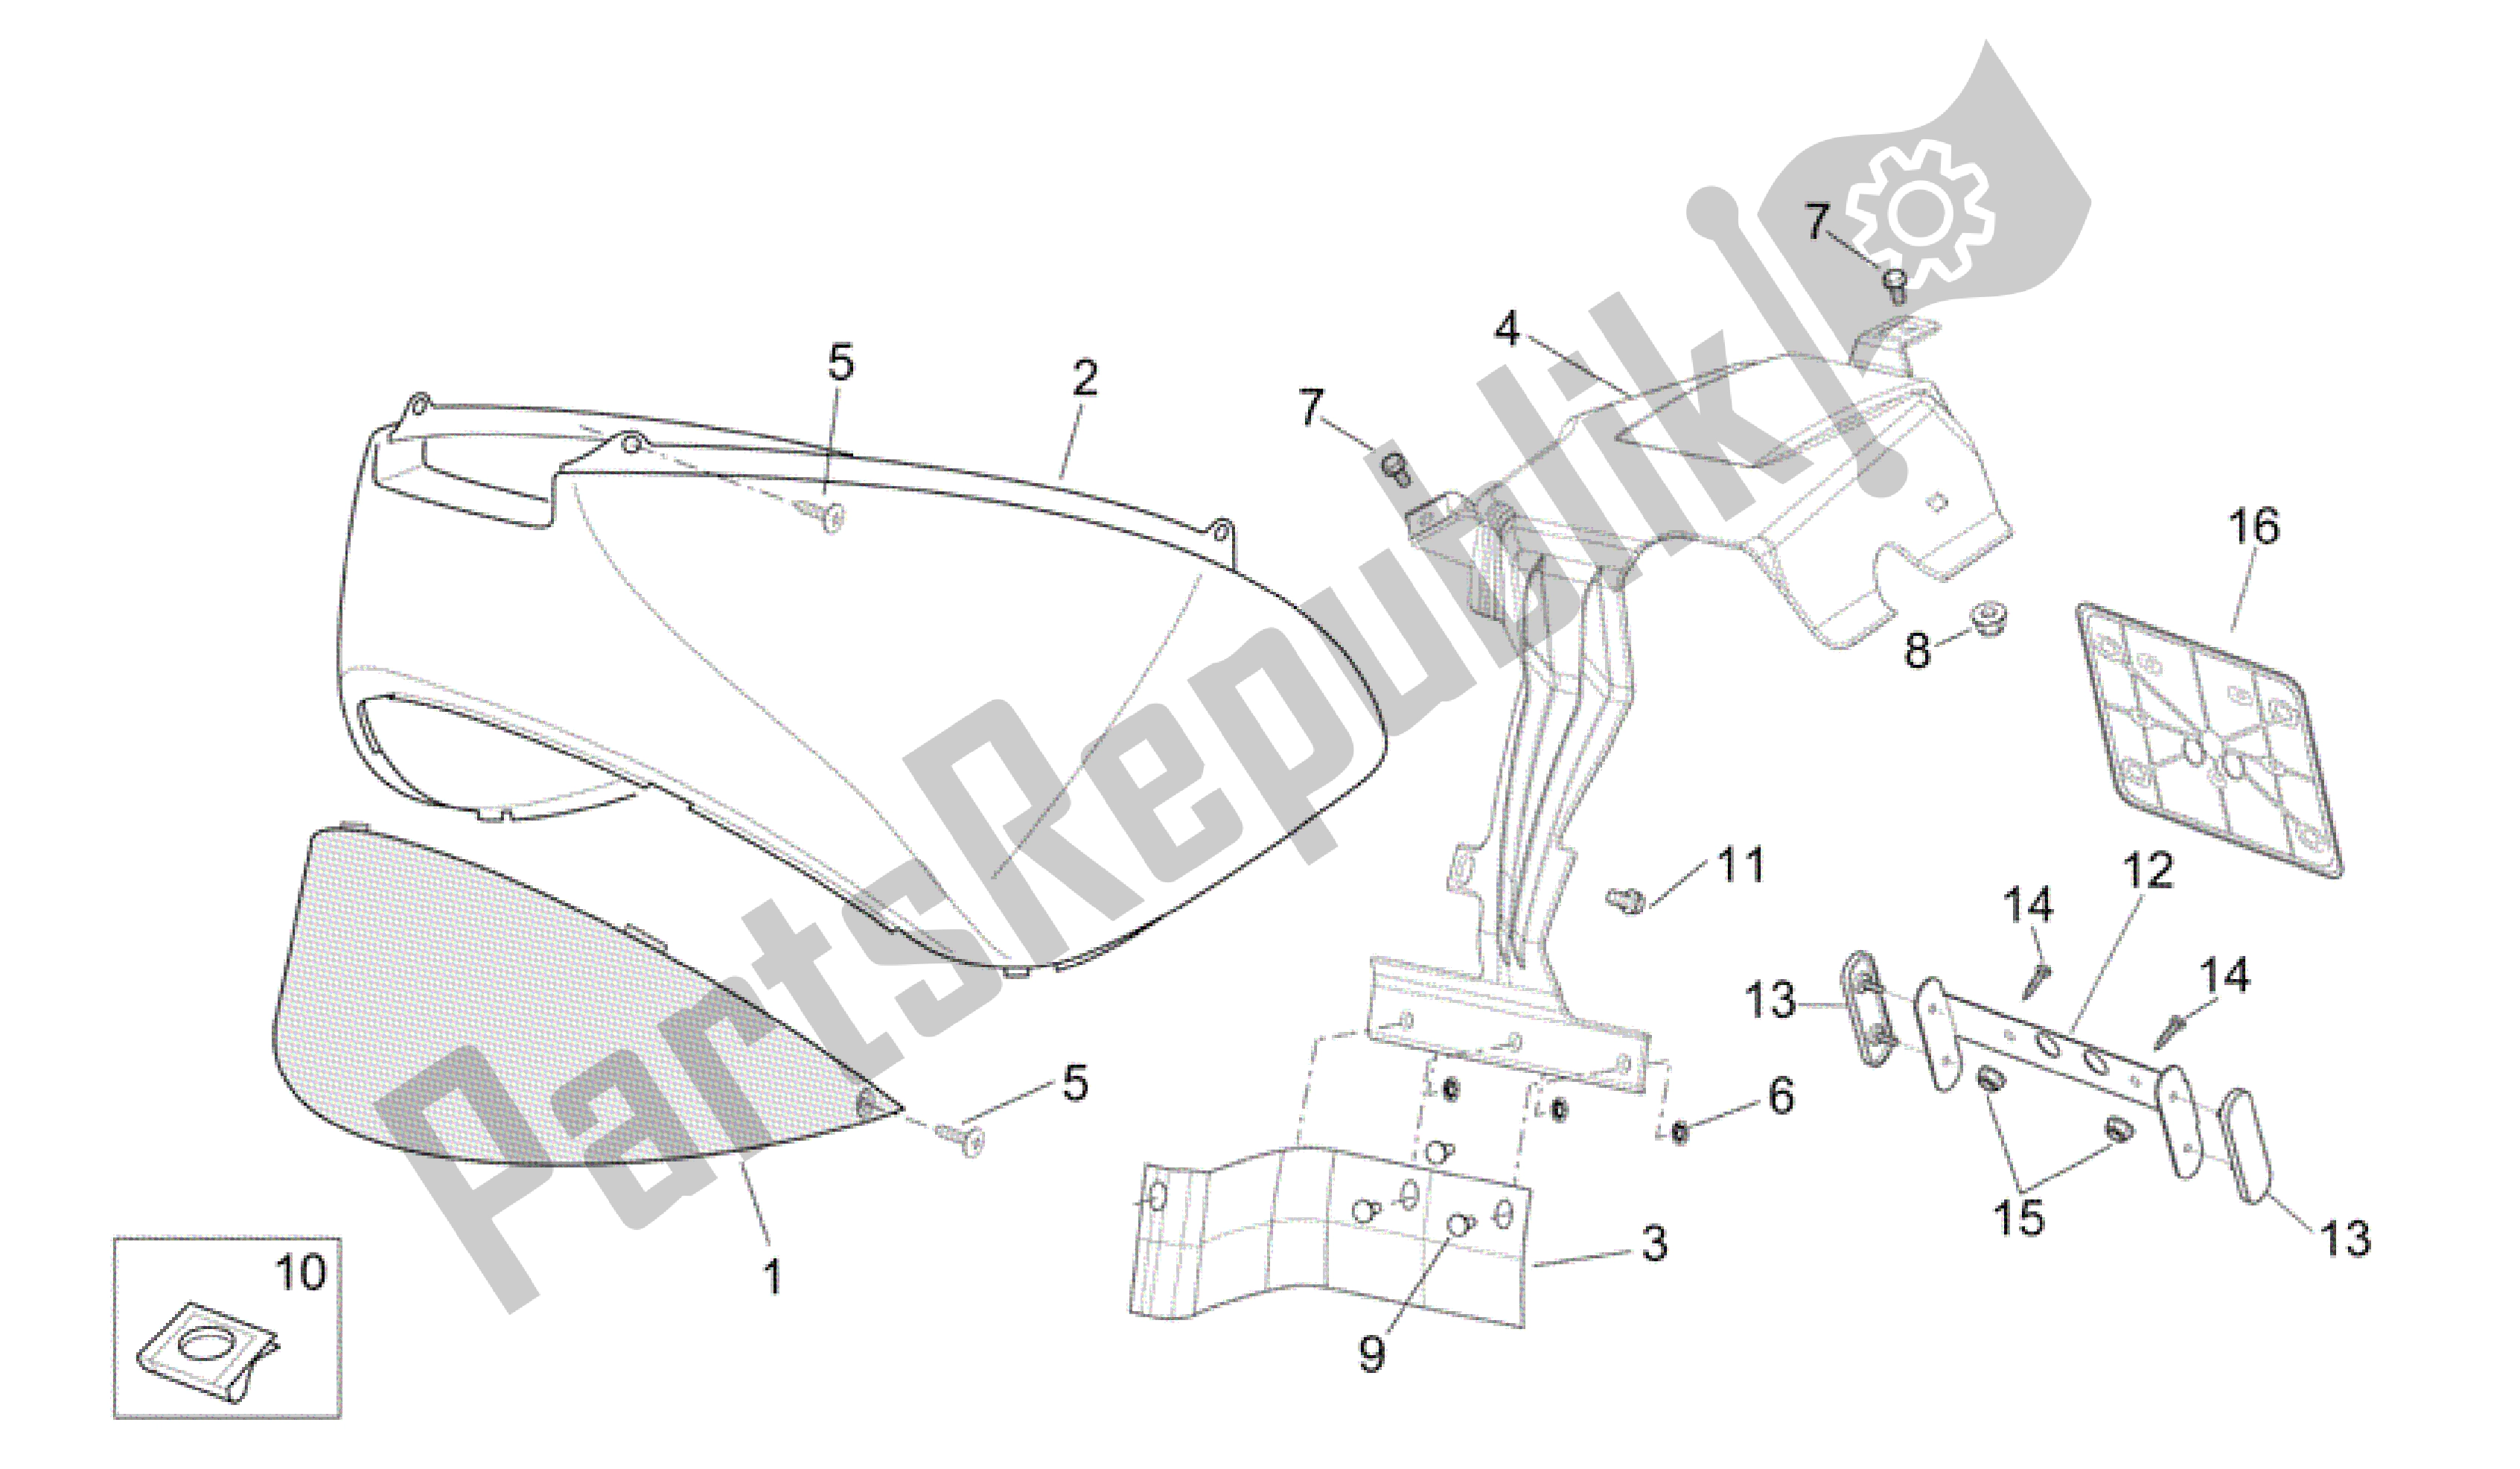 All parts for the Rear Body I of the Aprilia Scarabeo 250 2004 - 2006